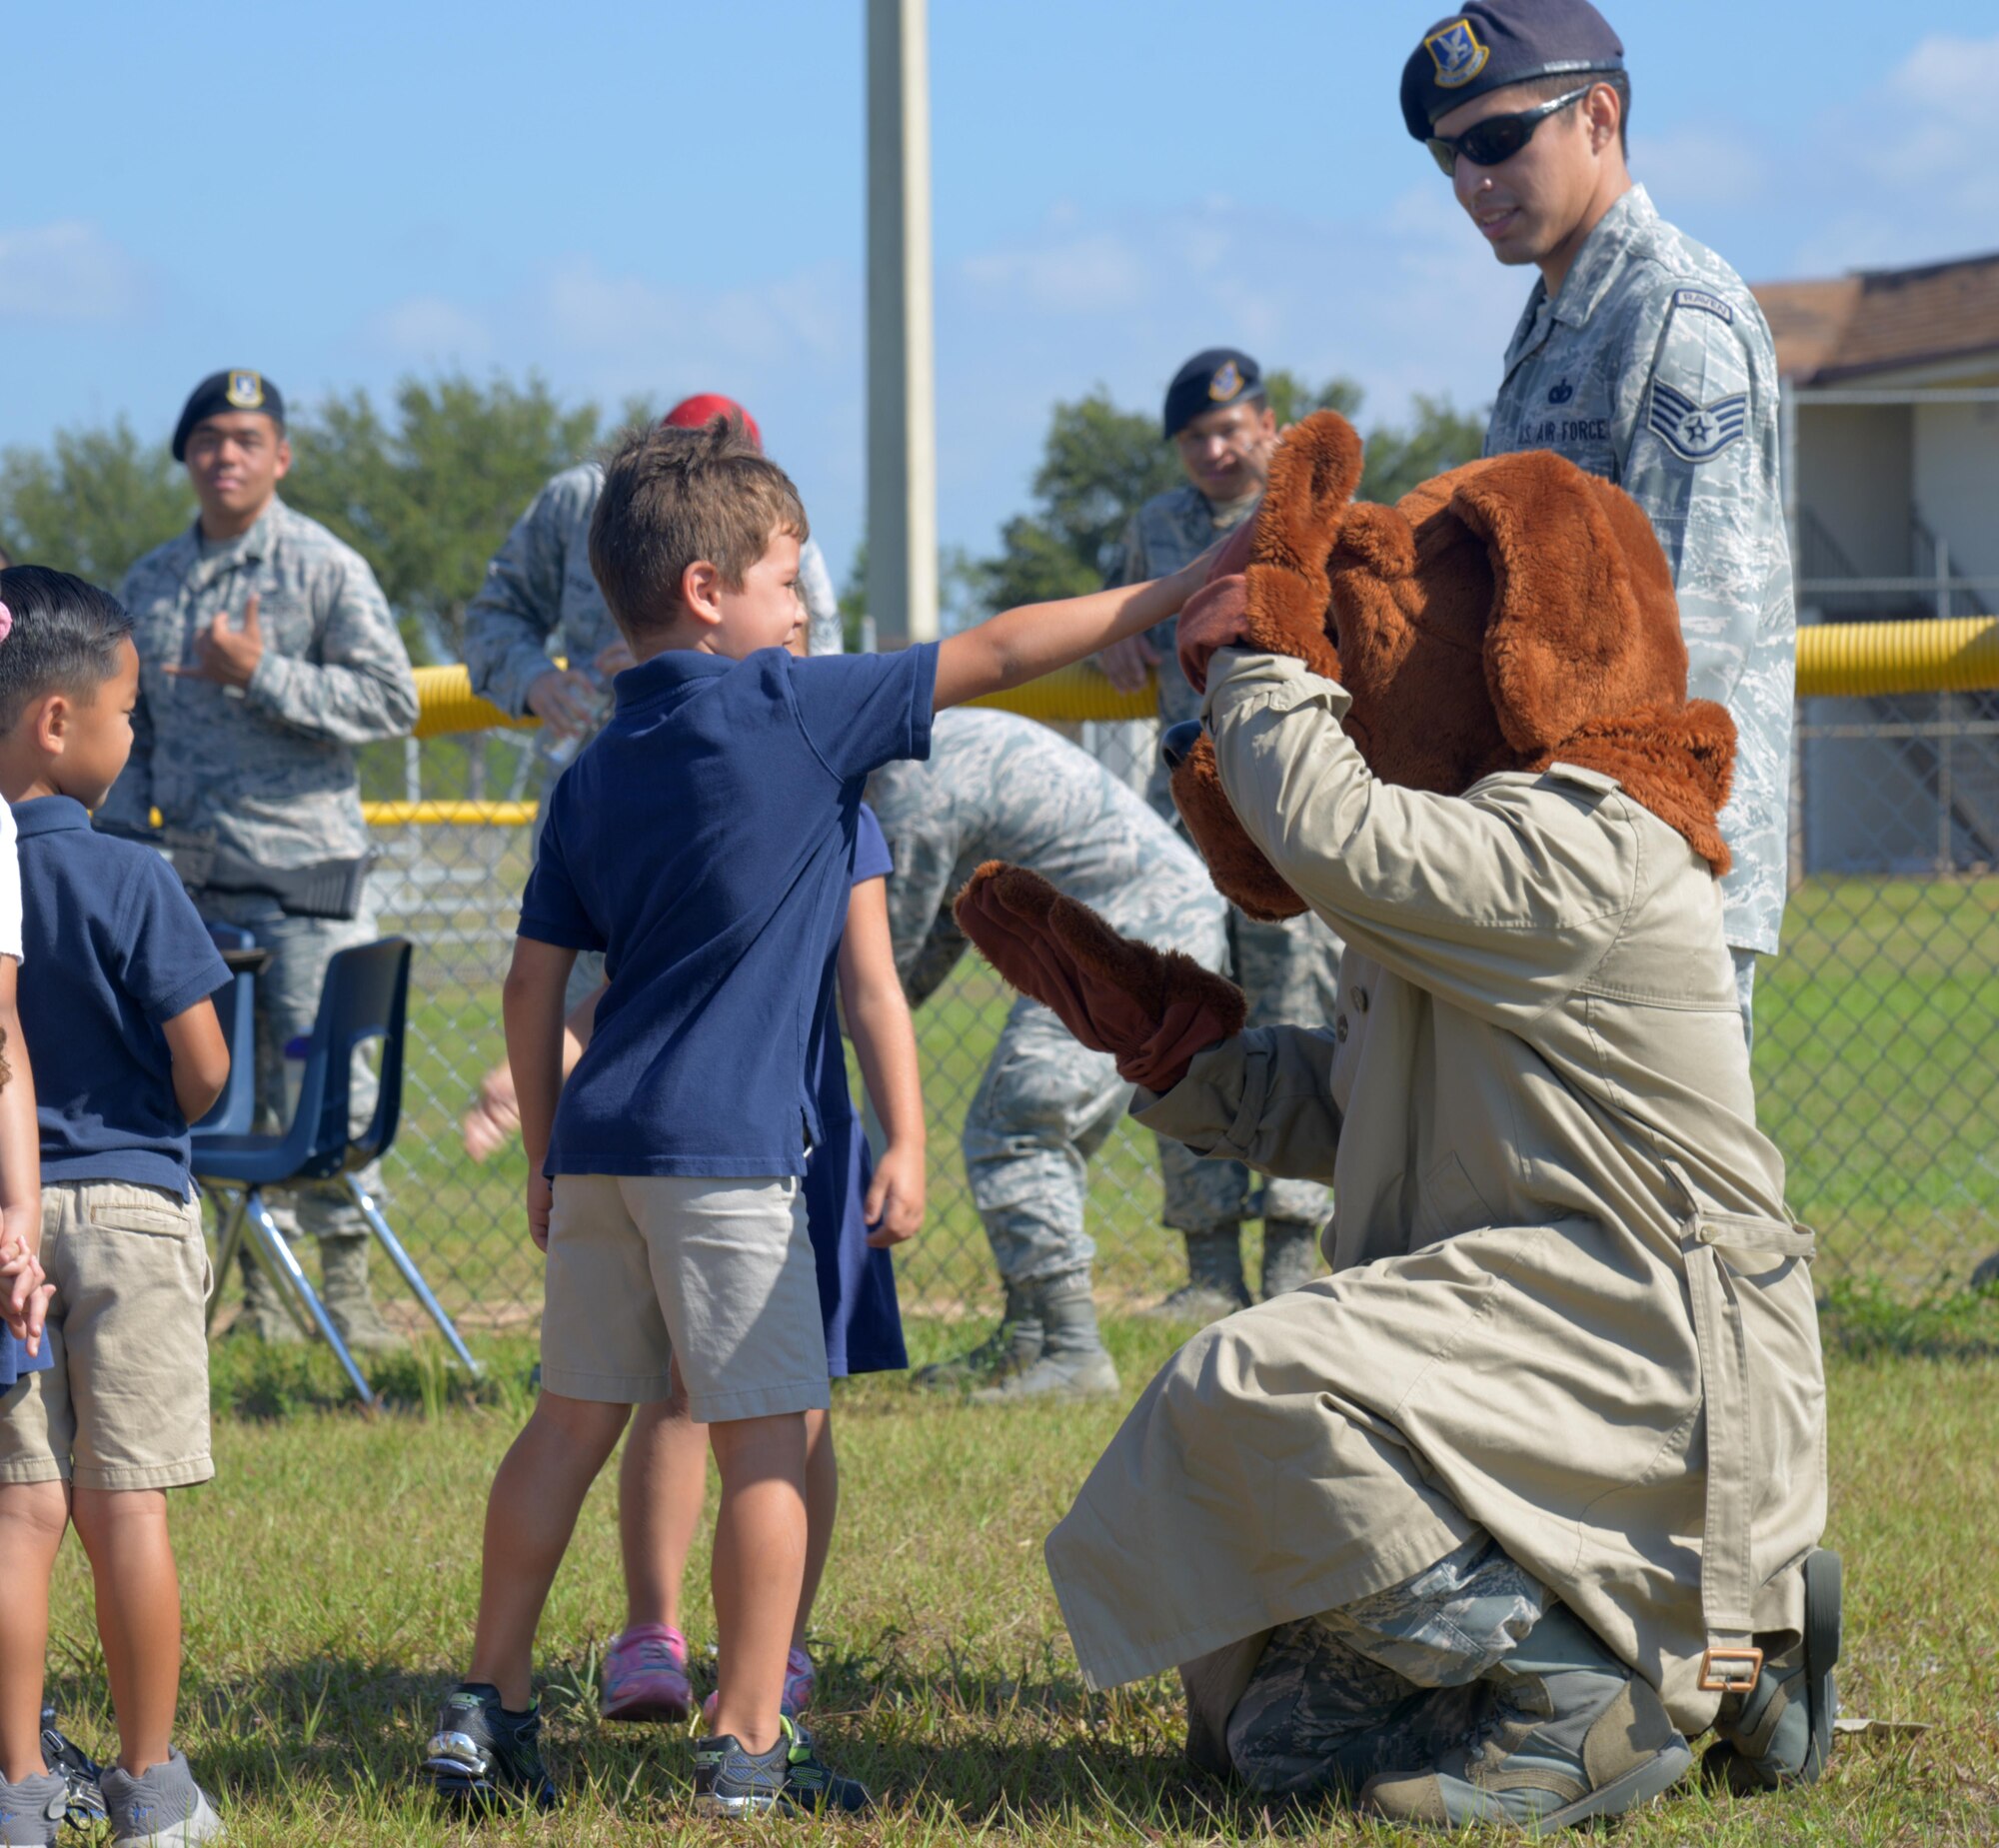 McGruff the Crime Dog gives a high-five to a Tinker Elementary School student at MacDill Air Force Base, Fla., May 16, 2017. The 6th Security Forces Squadron setup different police displays for the students and taught weapon safety in honor of National Police Week. (U.S. Air Force photo by Senior Airman Tori Long)